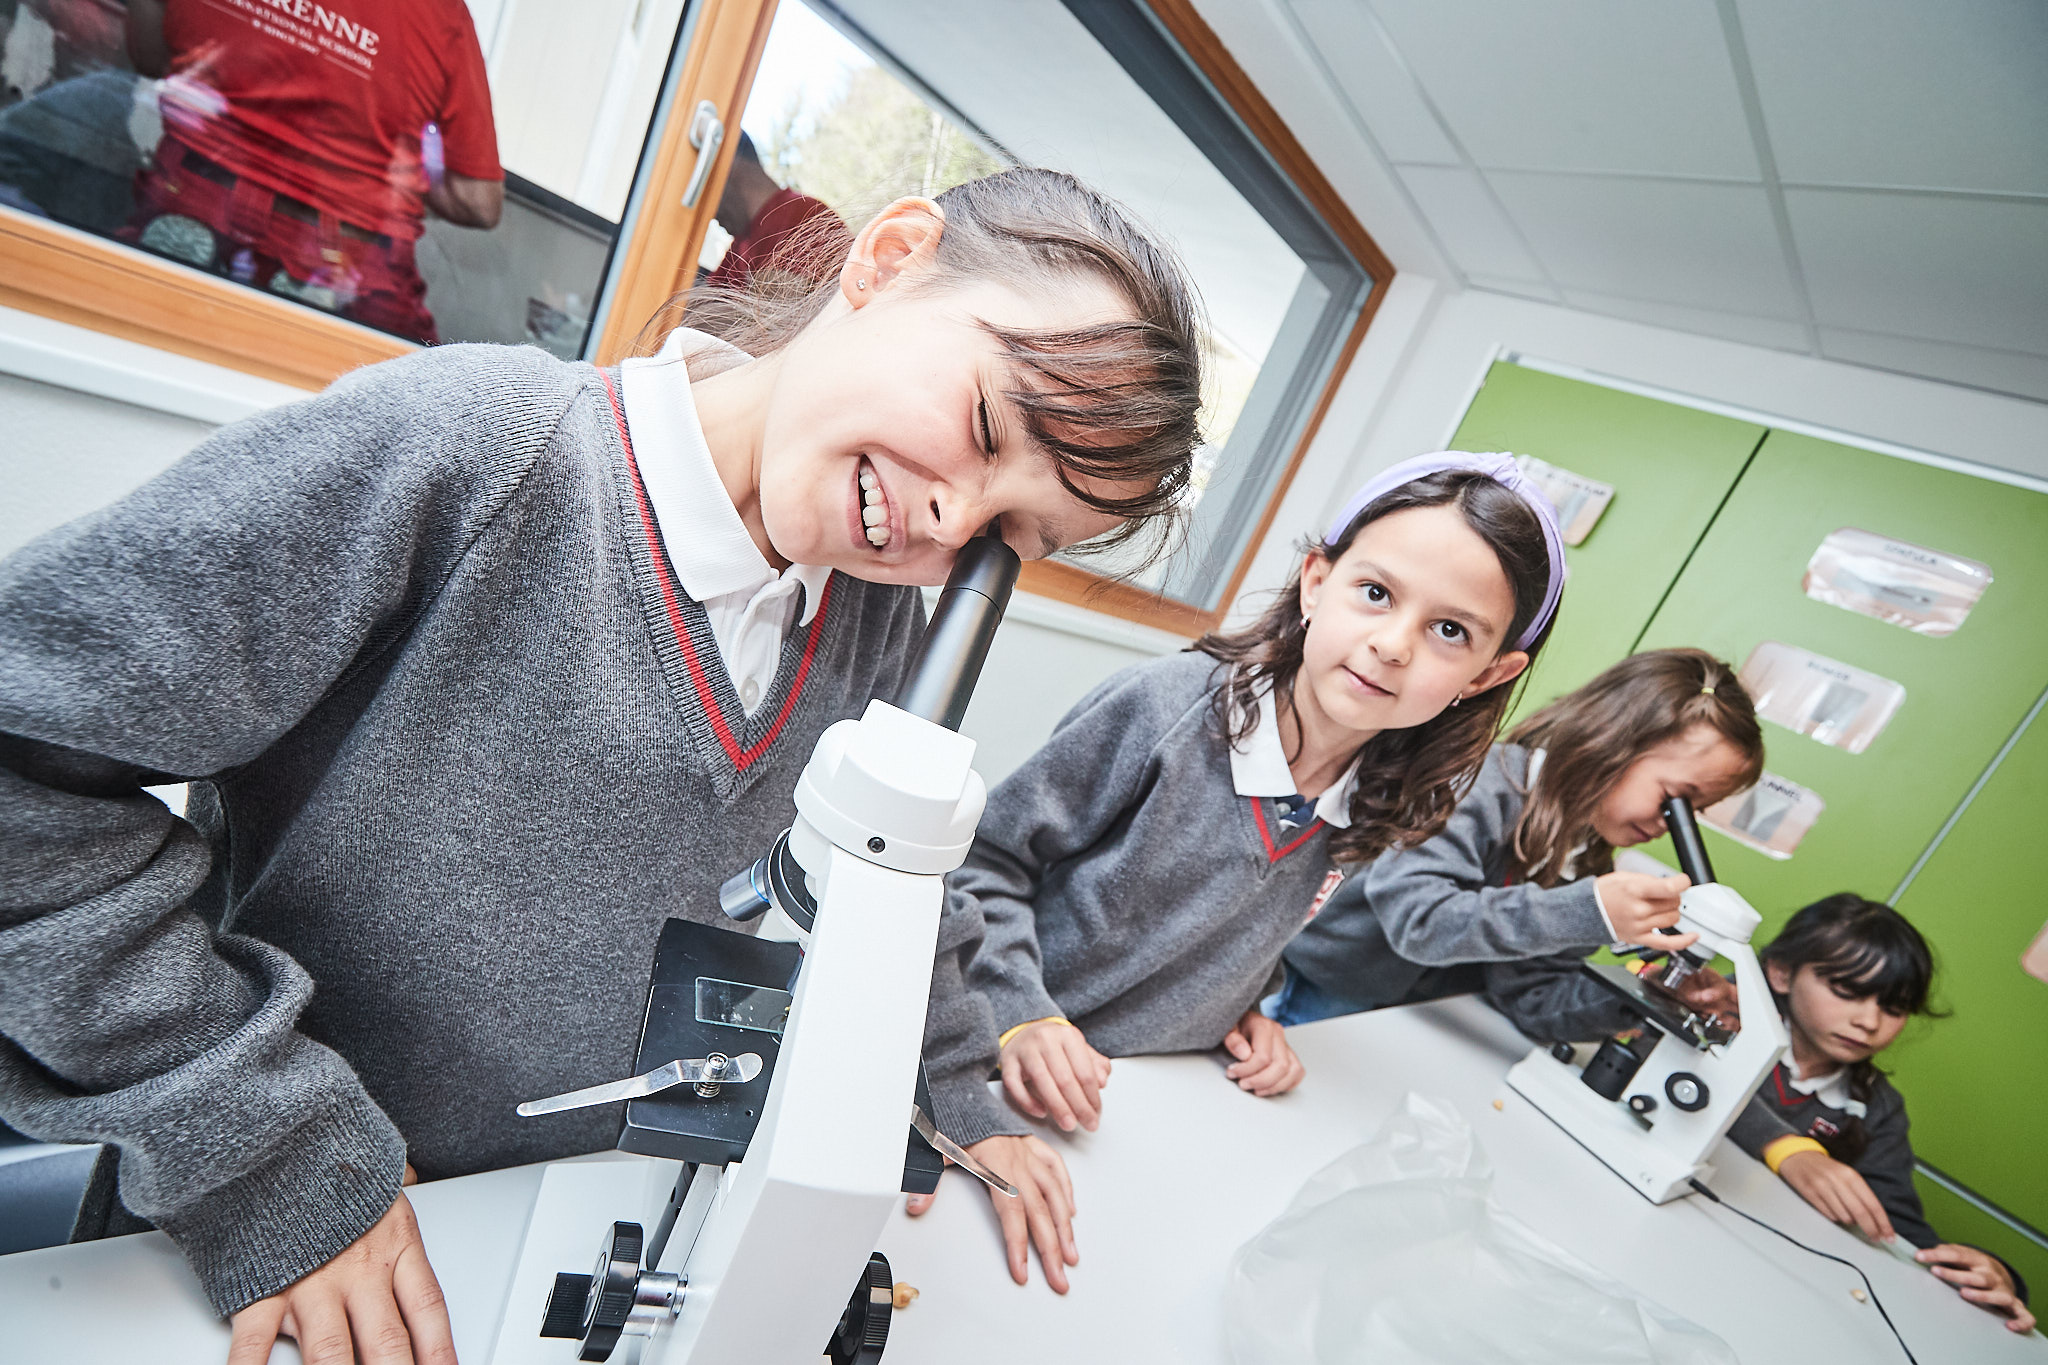 Using Microscopes to see the hidden world